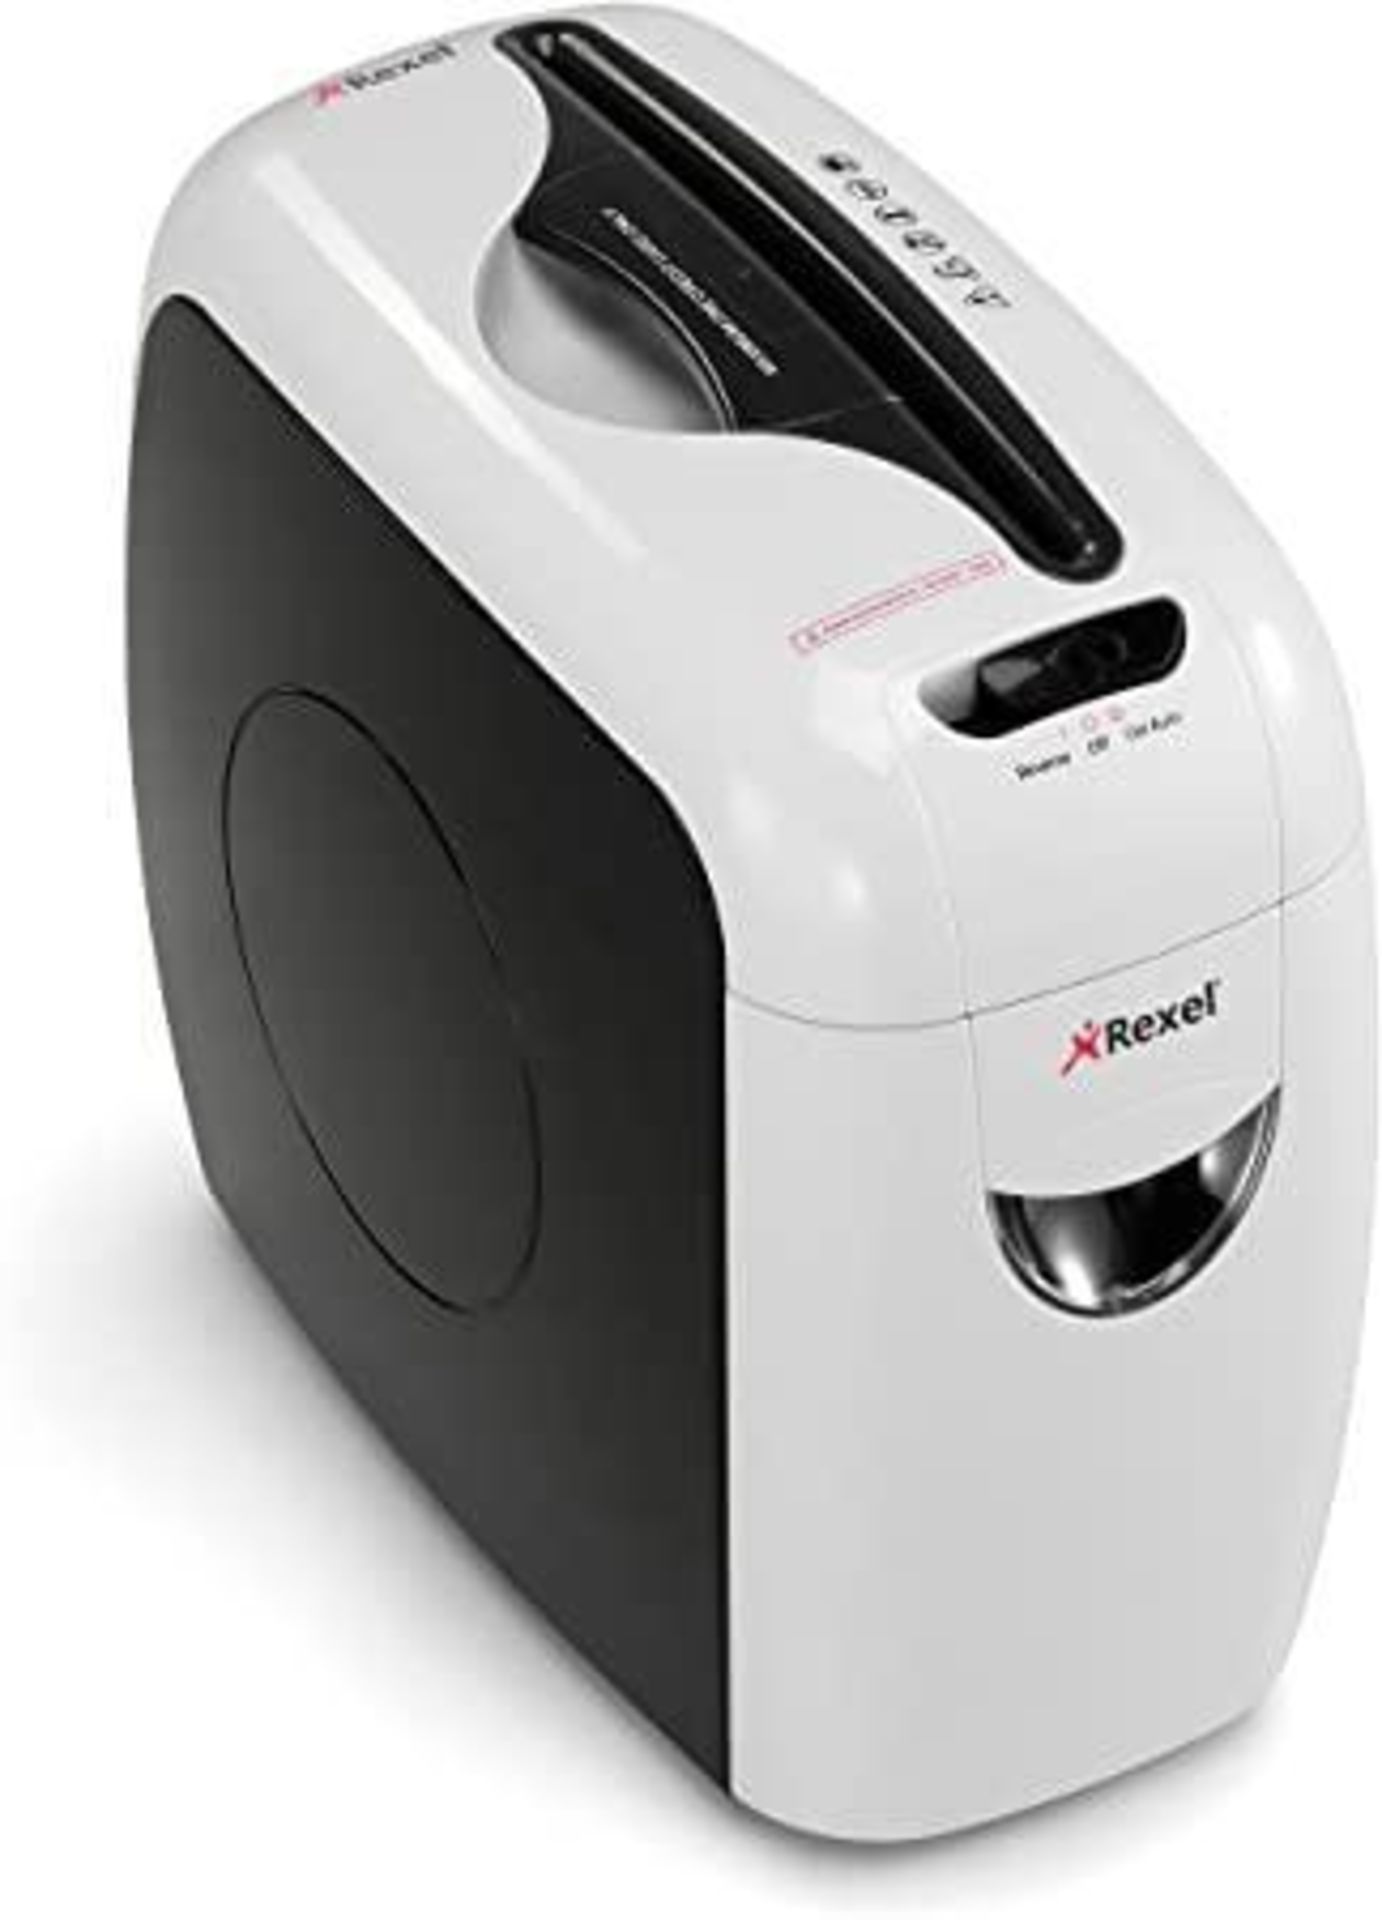 Rexel Prostyle Shredder for Home or Small Office Use